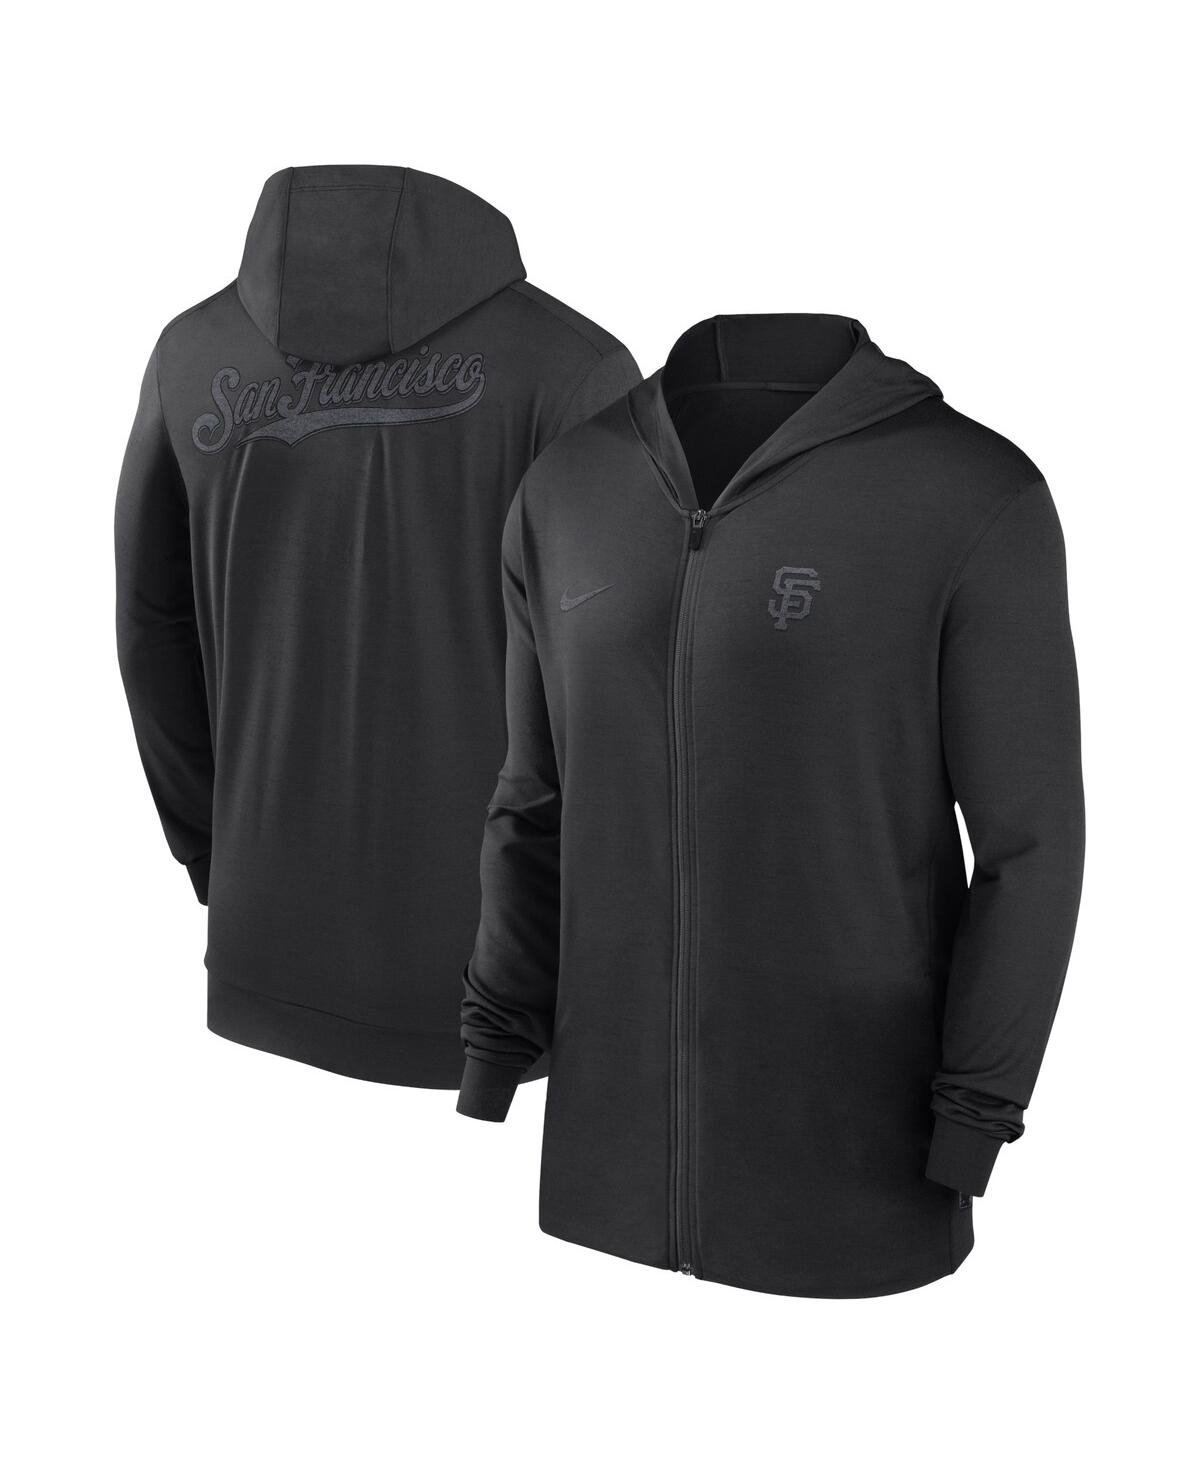 Nike Men's  Black San Francisco Giants Authentic Collection Travel Performance Full-zip Hoodie